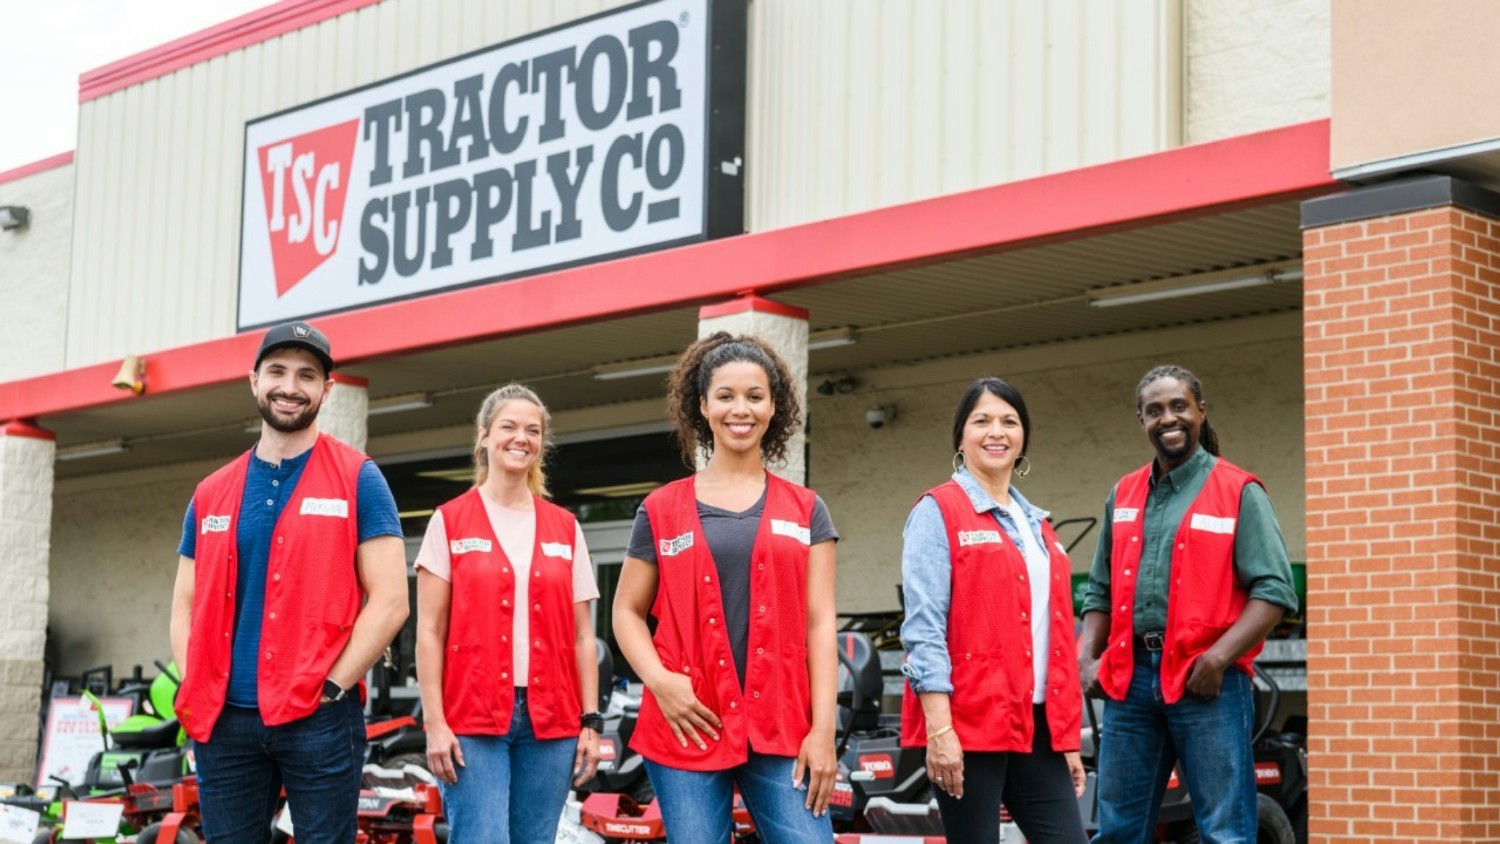 At Tractor Supply, our Team Members are a top priority! We work hard, have fun and make money to win together. 